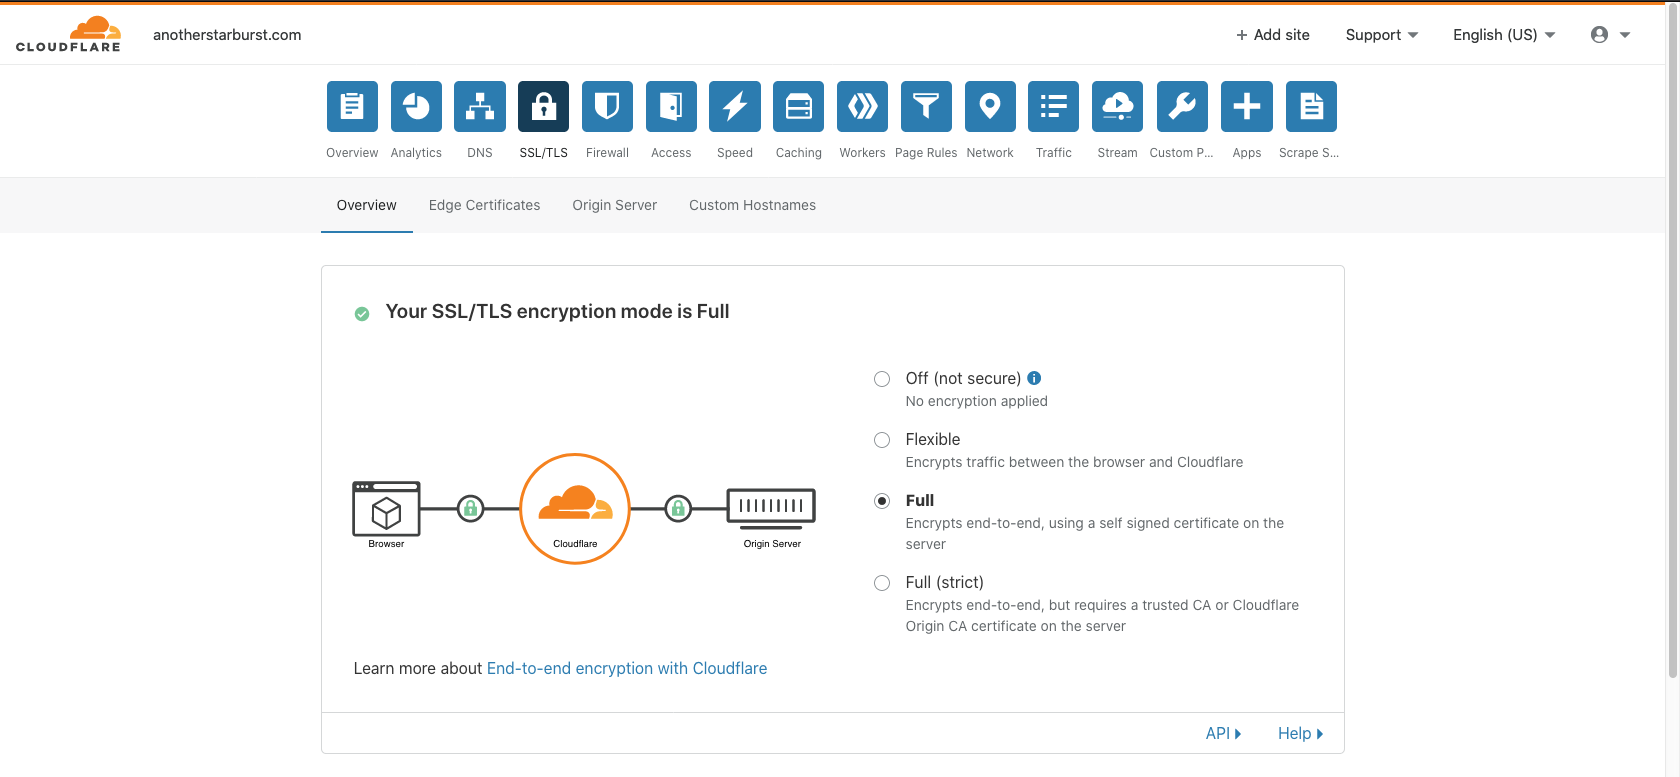 Cloudflare SSL/TLS encryption mode setting on Full - encrypting traffic end-to-end